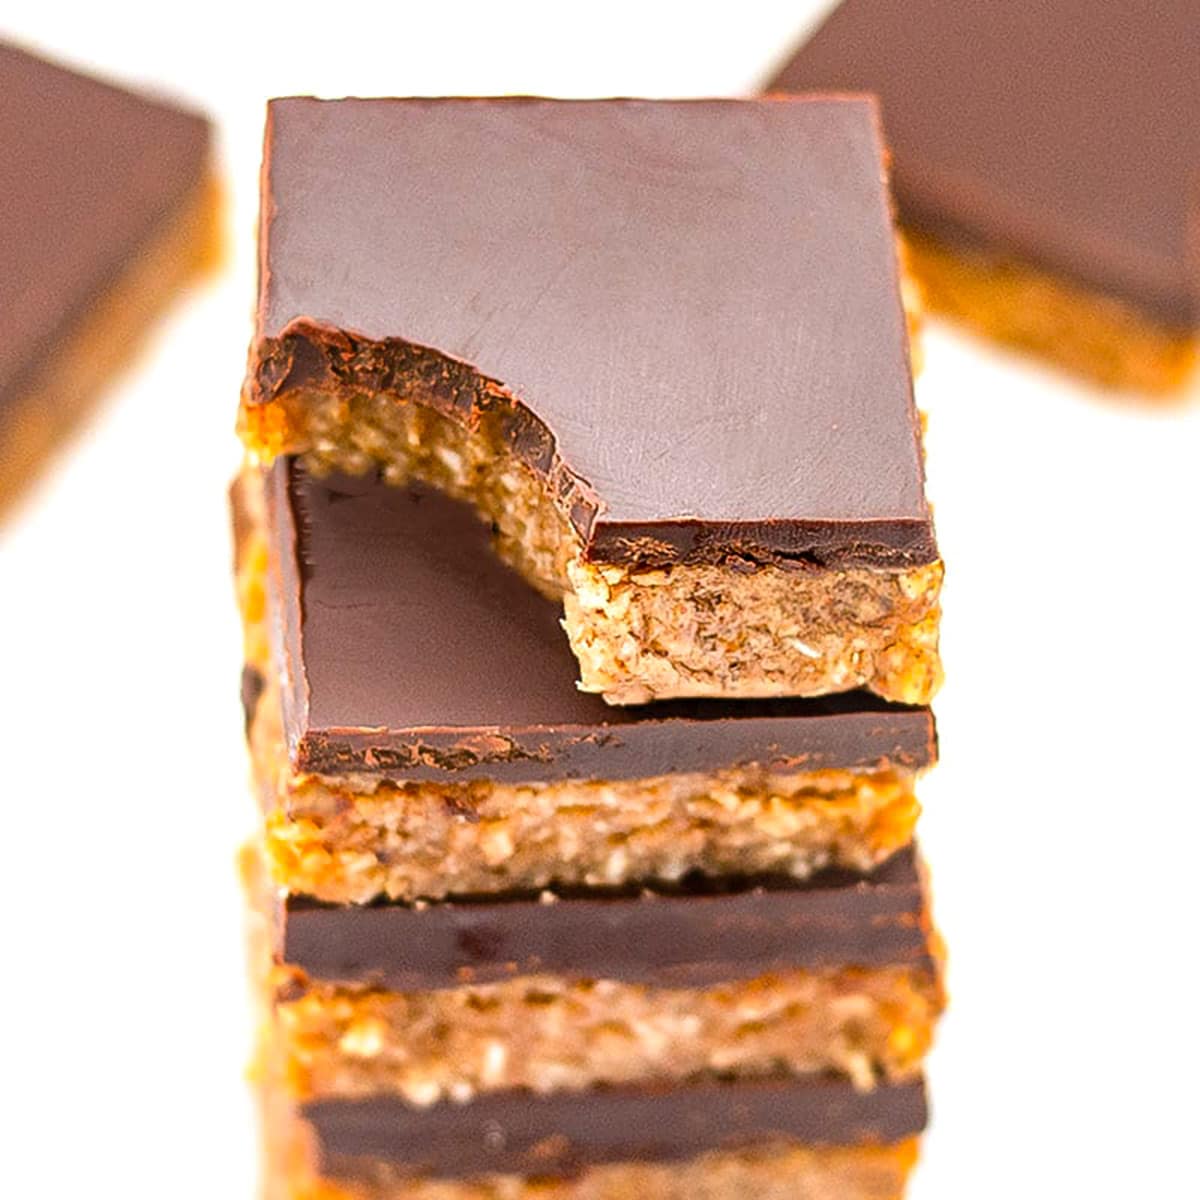 Keto chocolate almond slice stack on top of each other.